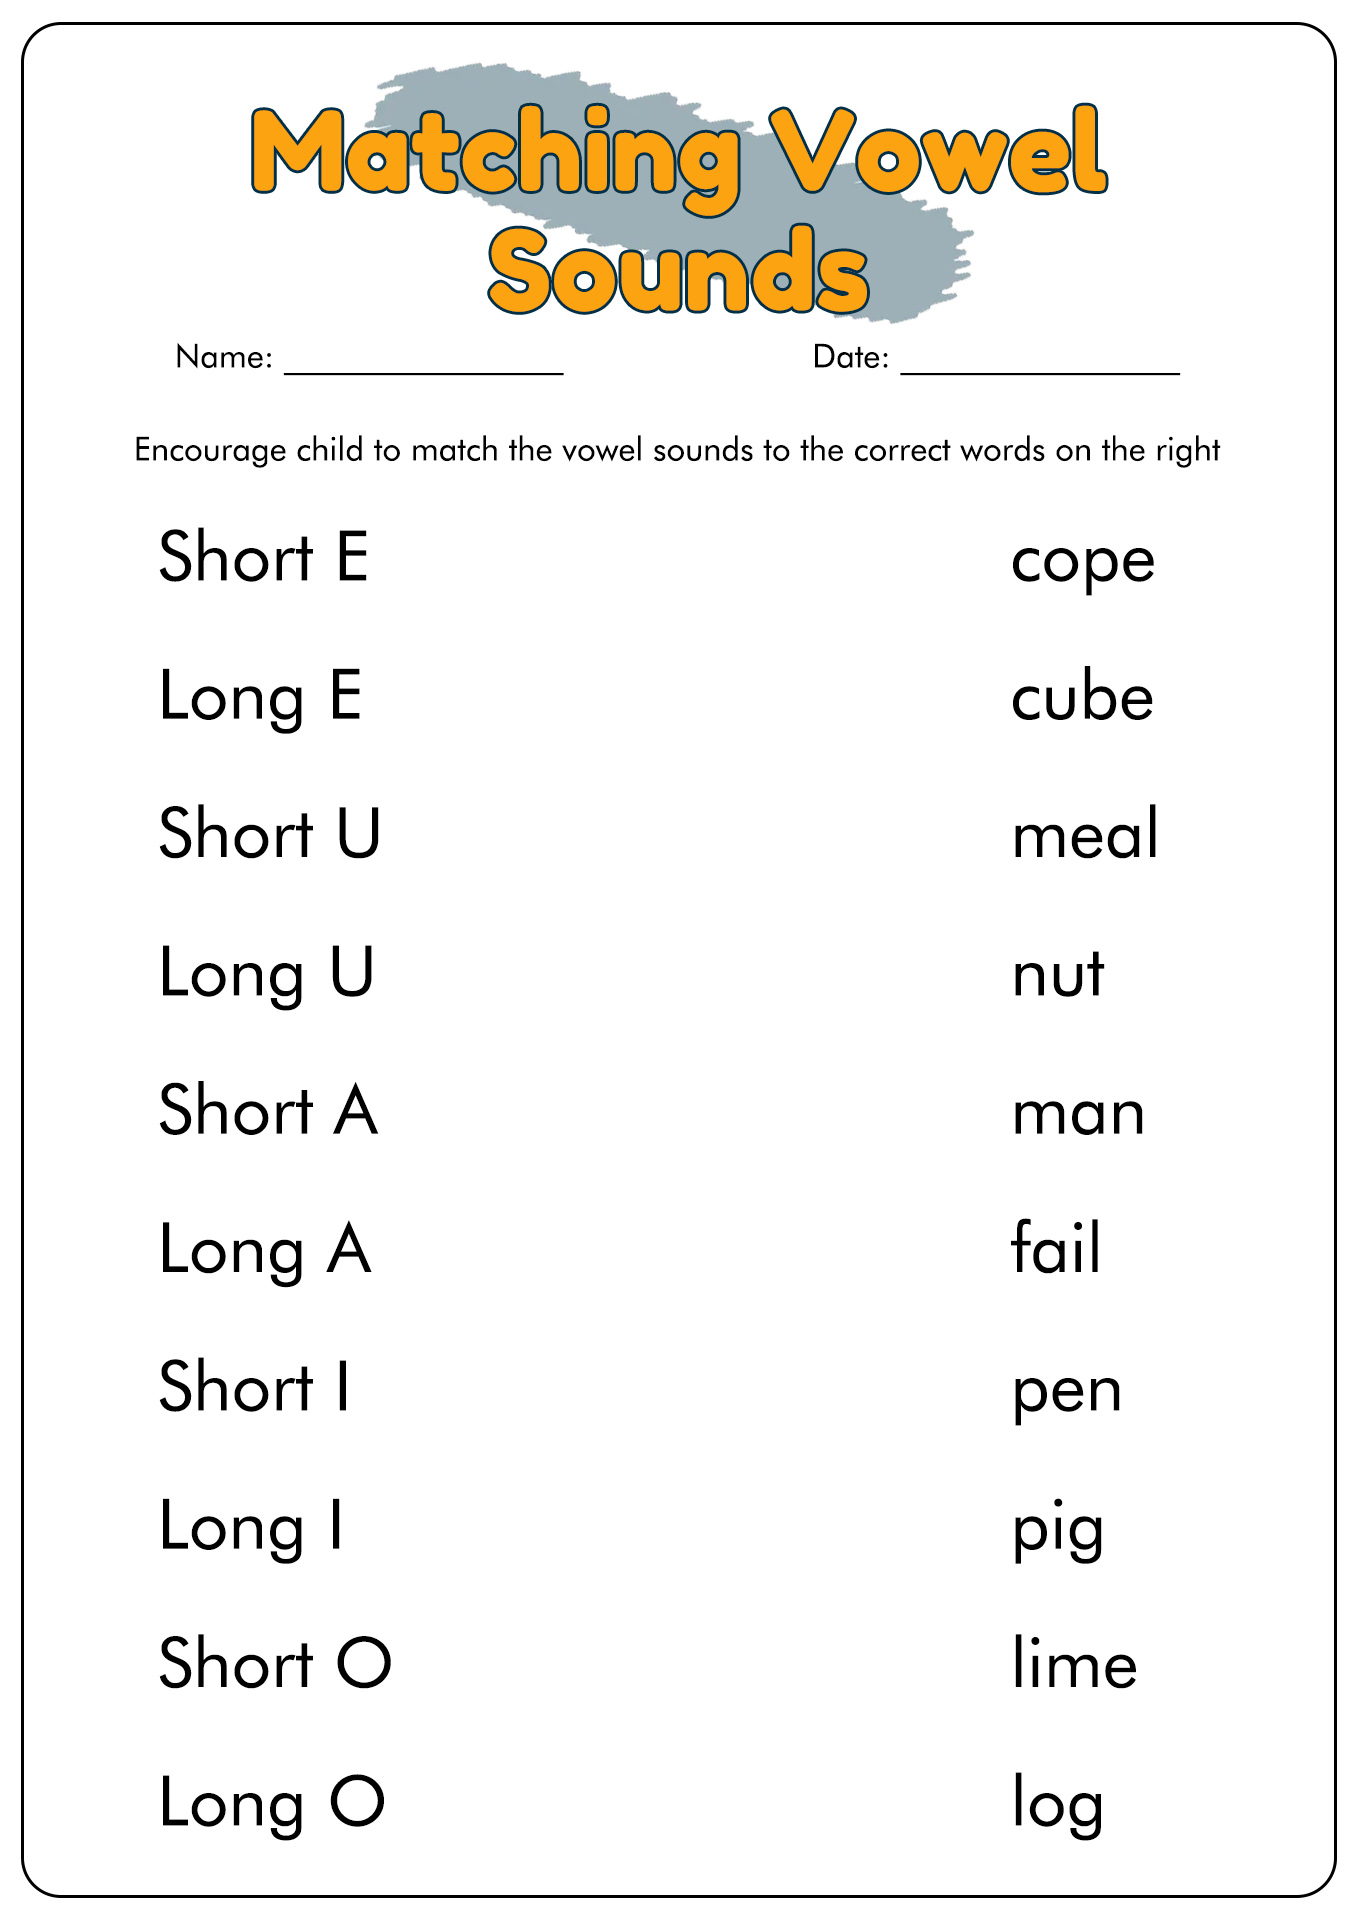 Short and Long Vowels Review Image